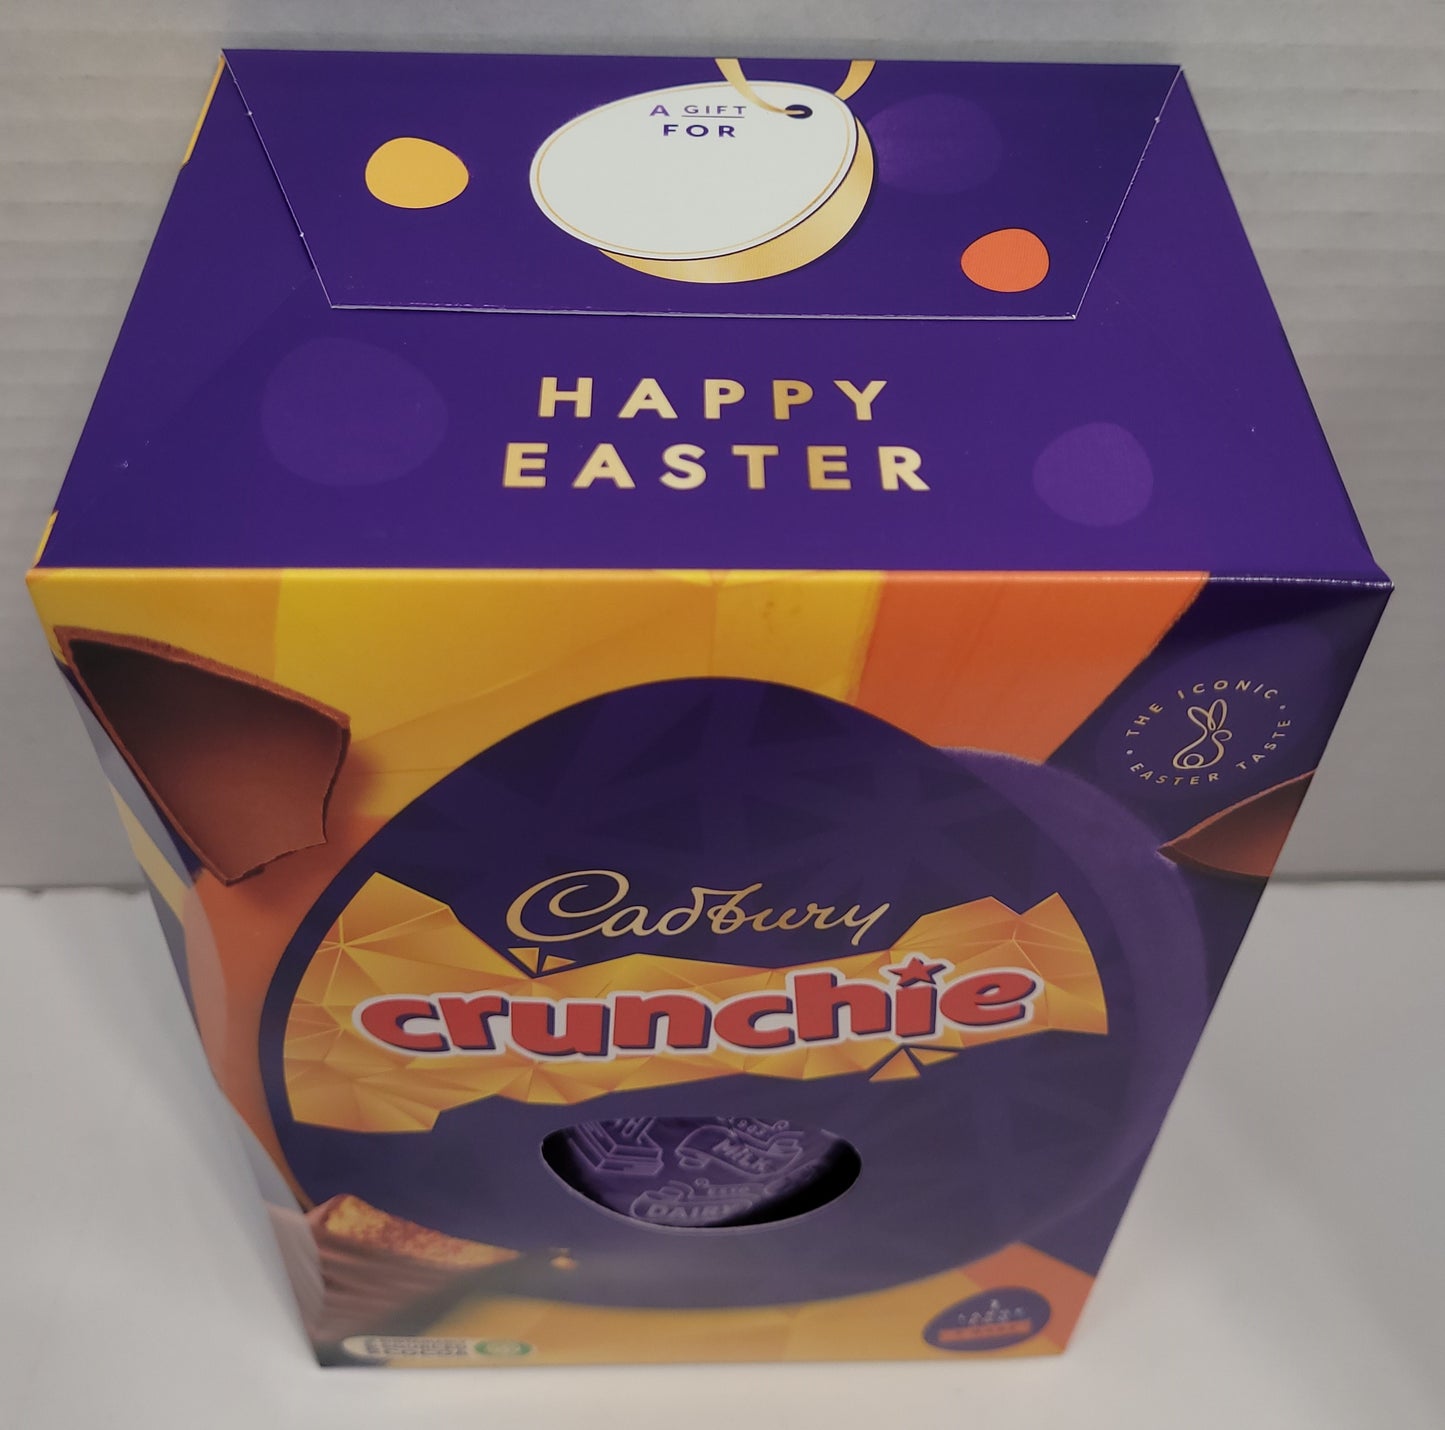 Top view of Box - A hollow chocolate egg made with the world-famous Cadbury Dairy Milk chocolate and filled with two Cadbury Crunchie bars.   Bright festive packaging  perfect for the holiday!    Contents: One hollow chocolate egg and two bars of honeycombed milk chocolate.  Size: 190g.   Imported from the UK